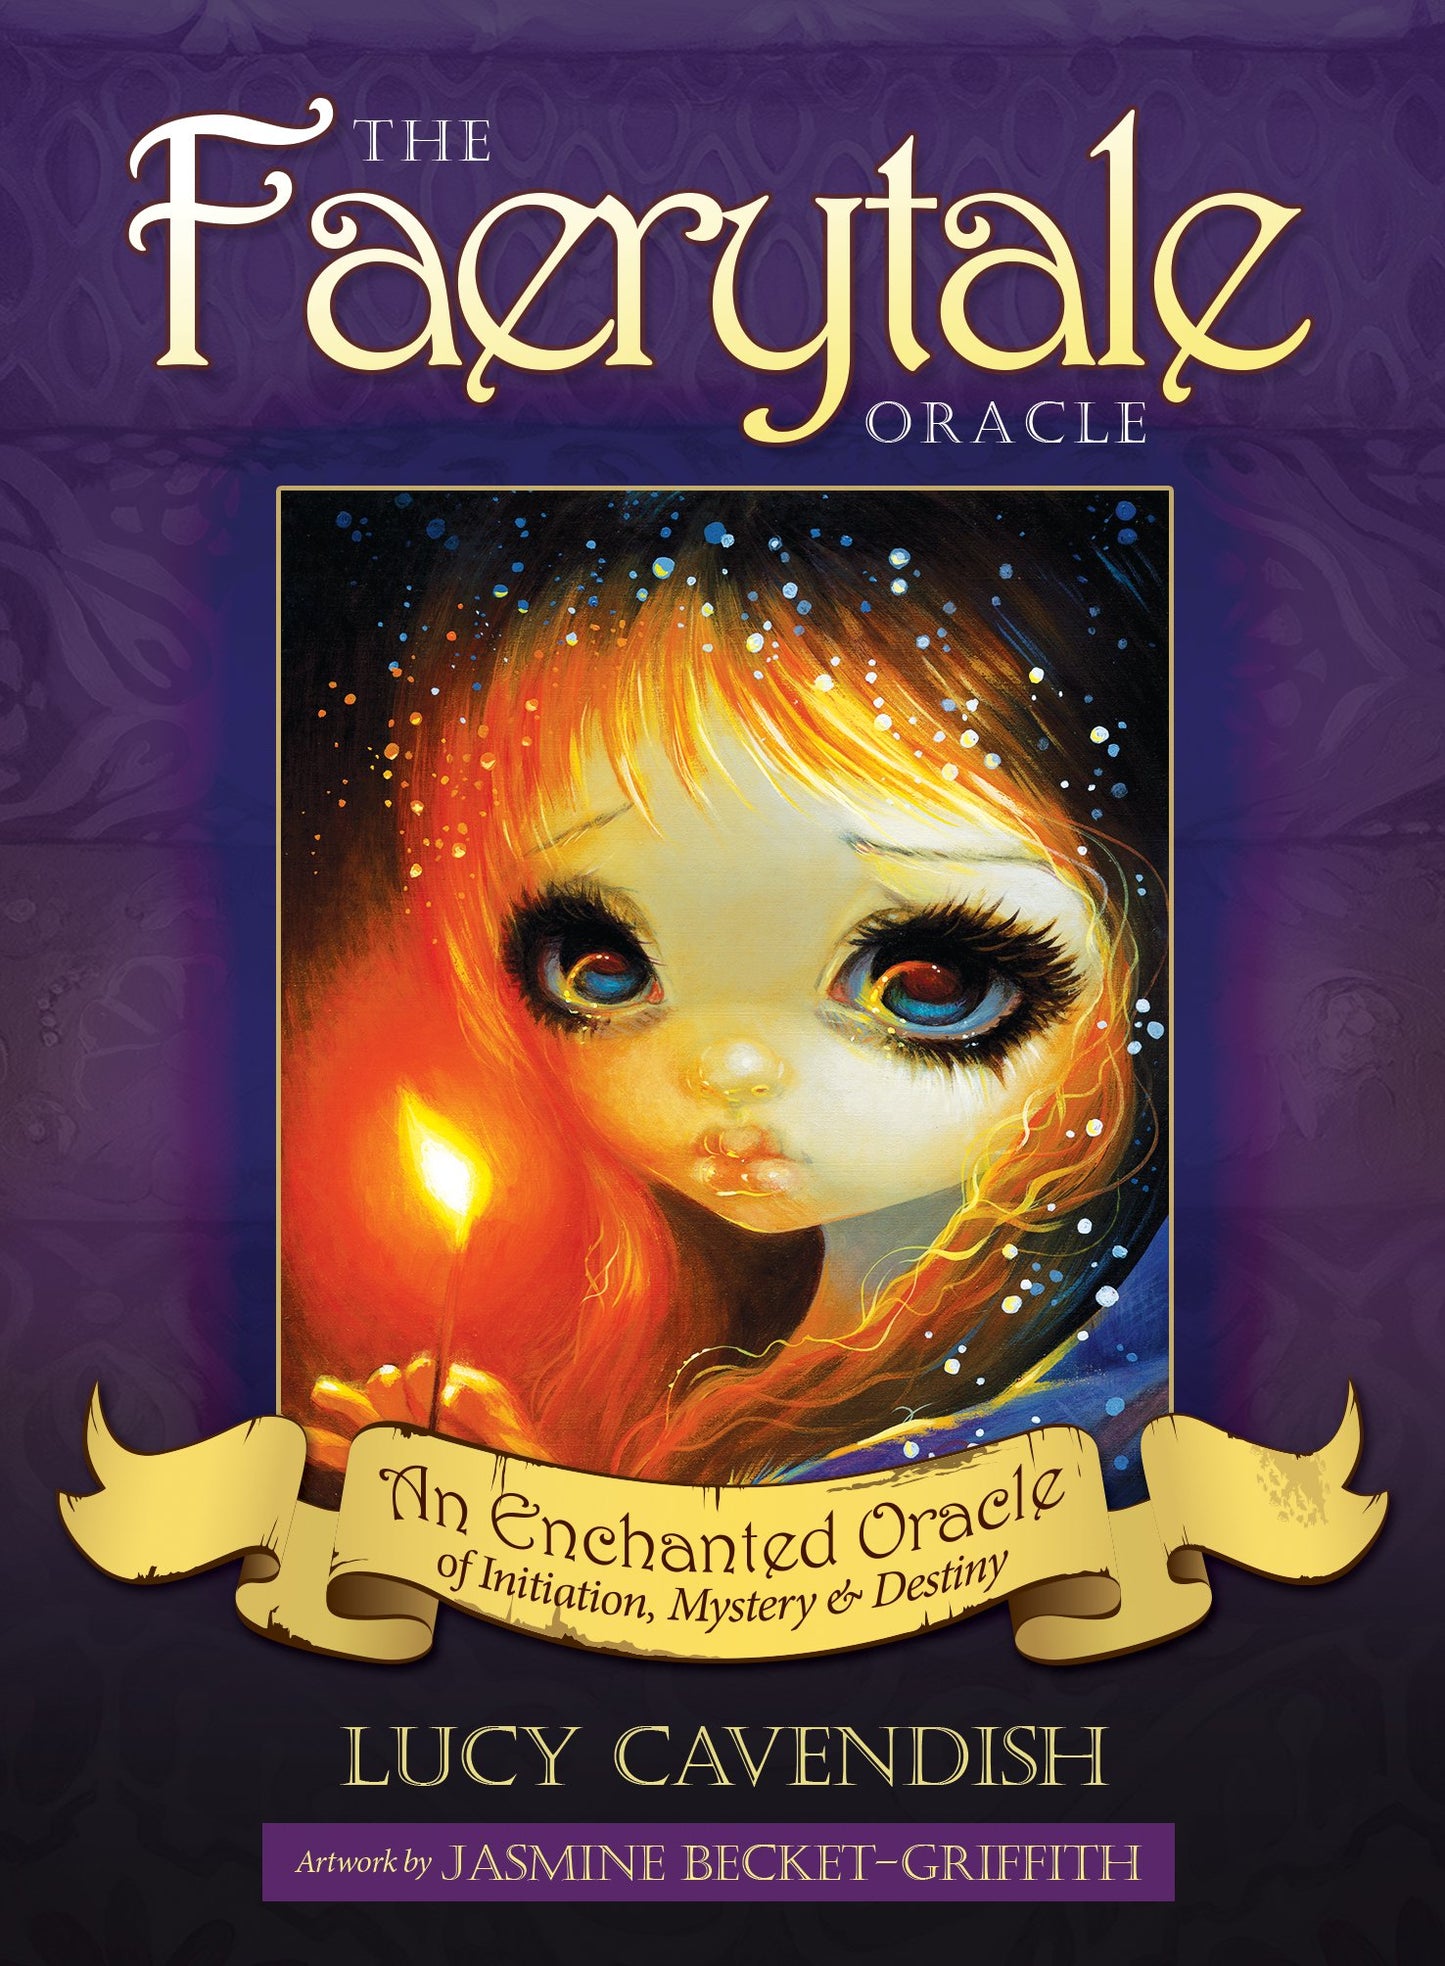 The Enchanted Faerytale Oracle